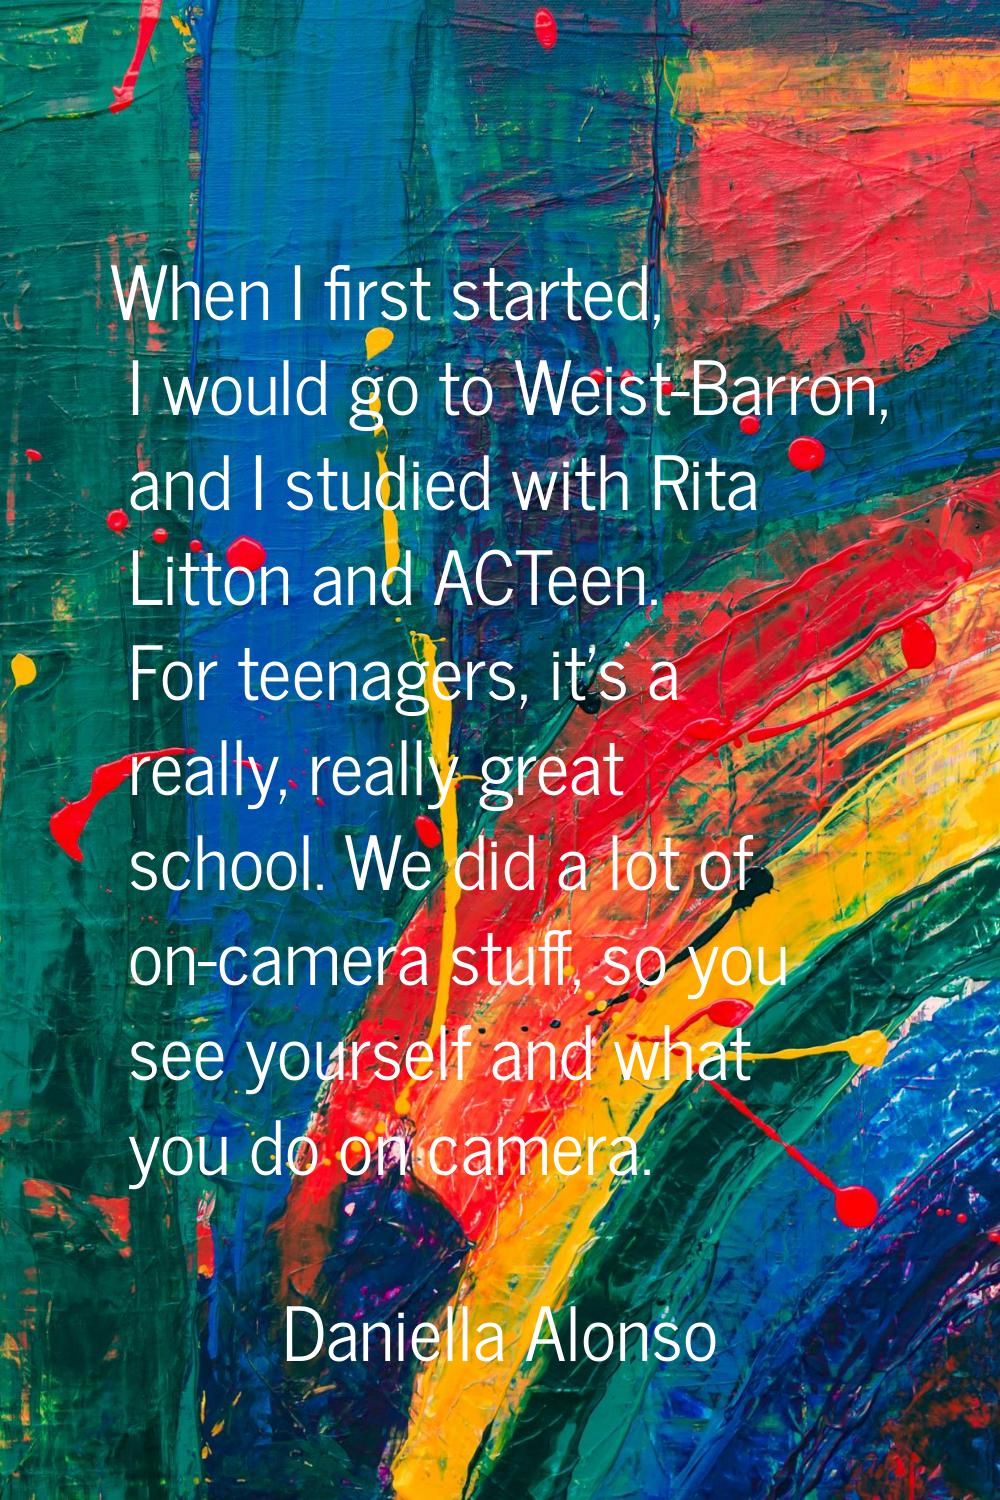 When I first started, I would go to Weist-Barron, and I studied with Rita Litton and ACTeen. For te